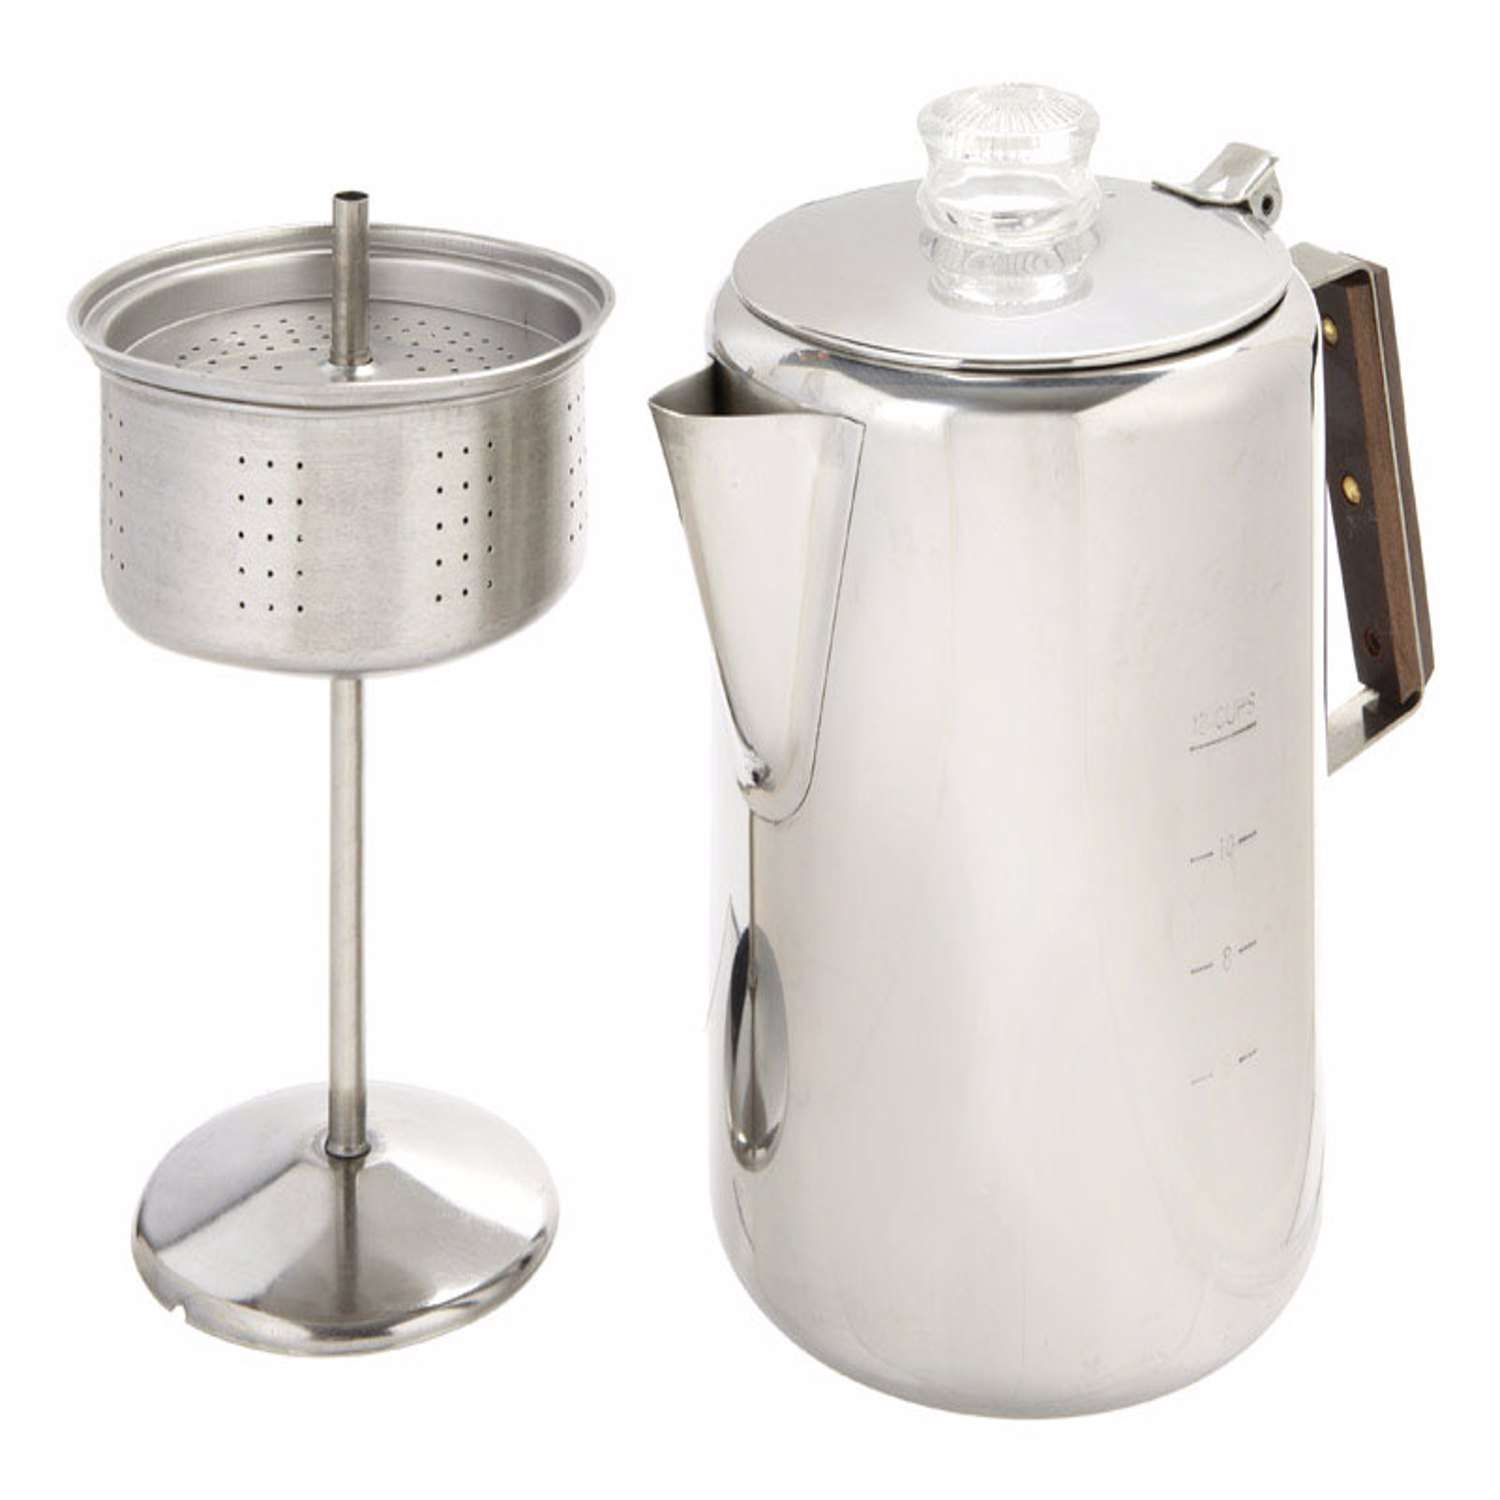 Moss & Stone Electric Coffee Percolator , Camping Coffee Pot Silver Body  with Stainless Steel Lids , Percolator Electric Pot - 10 Cups